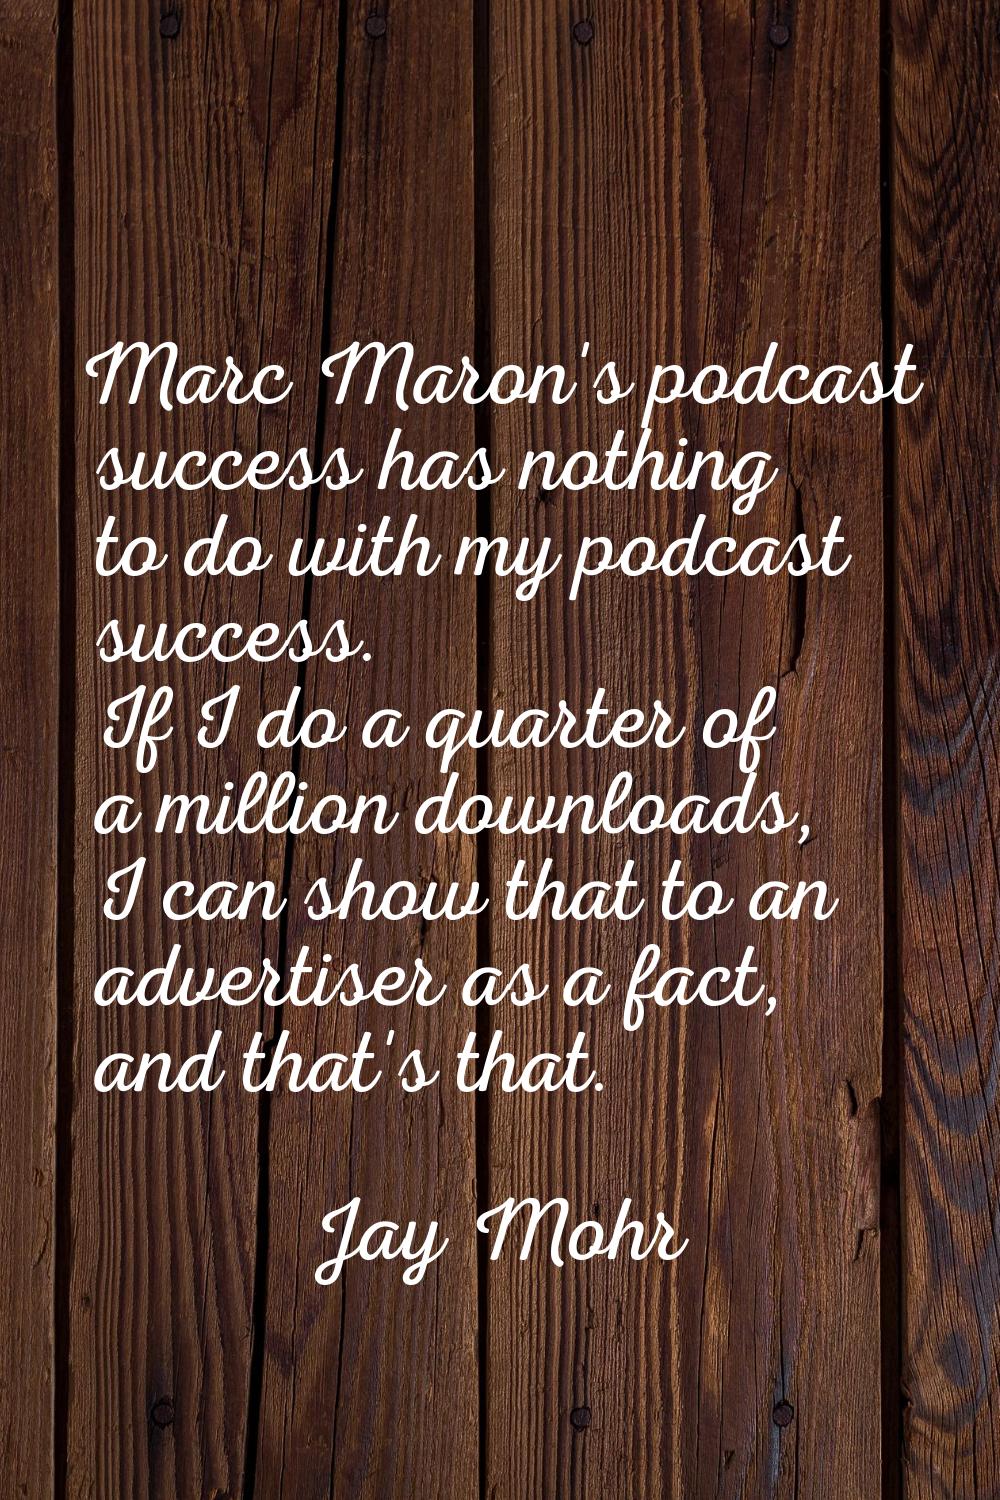 Marc Maron's podcast success has nothing to do with my podcast success. If I do a quarter of a mill